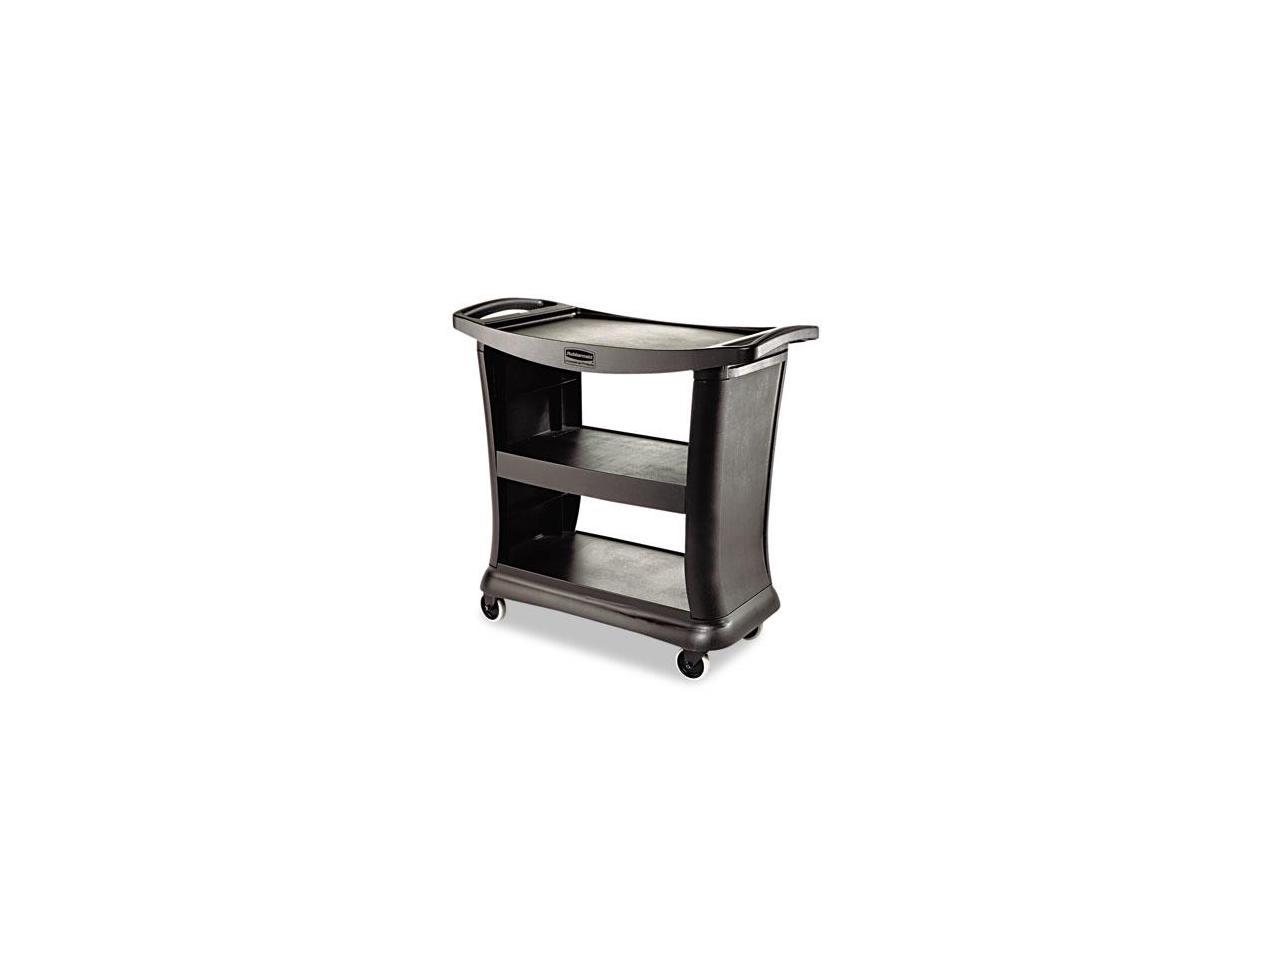 Rubbermaid Commercial Executive Service Cart, Three-Shelf, 20.33w x 38.9d x 38.9 h, Black -RCP9T6800BK - image 1 of 5